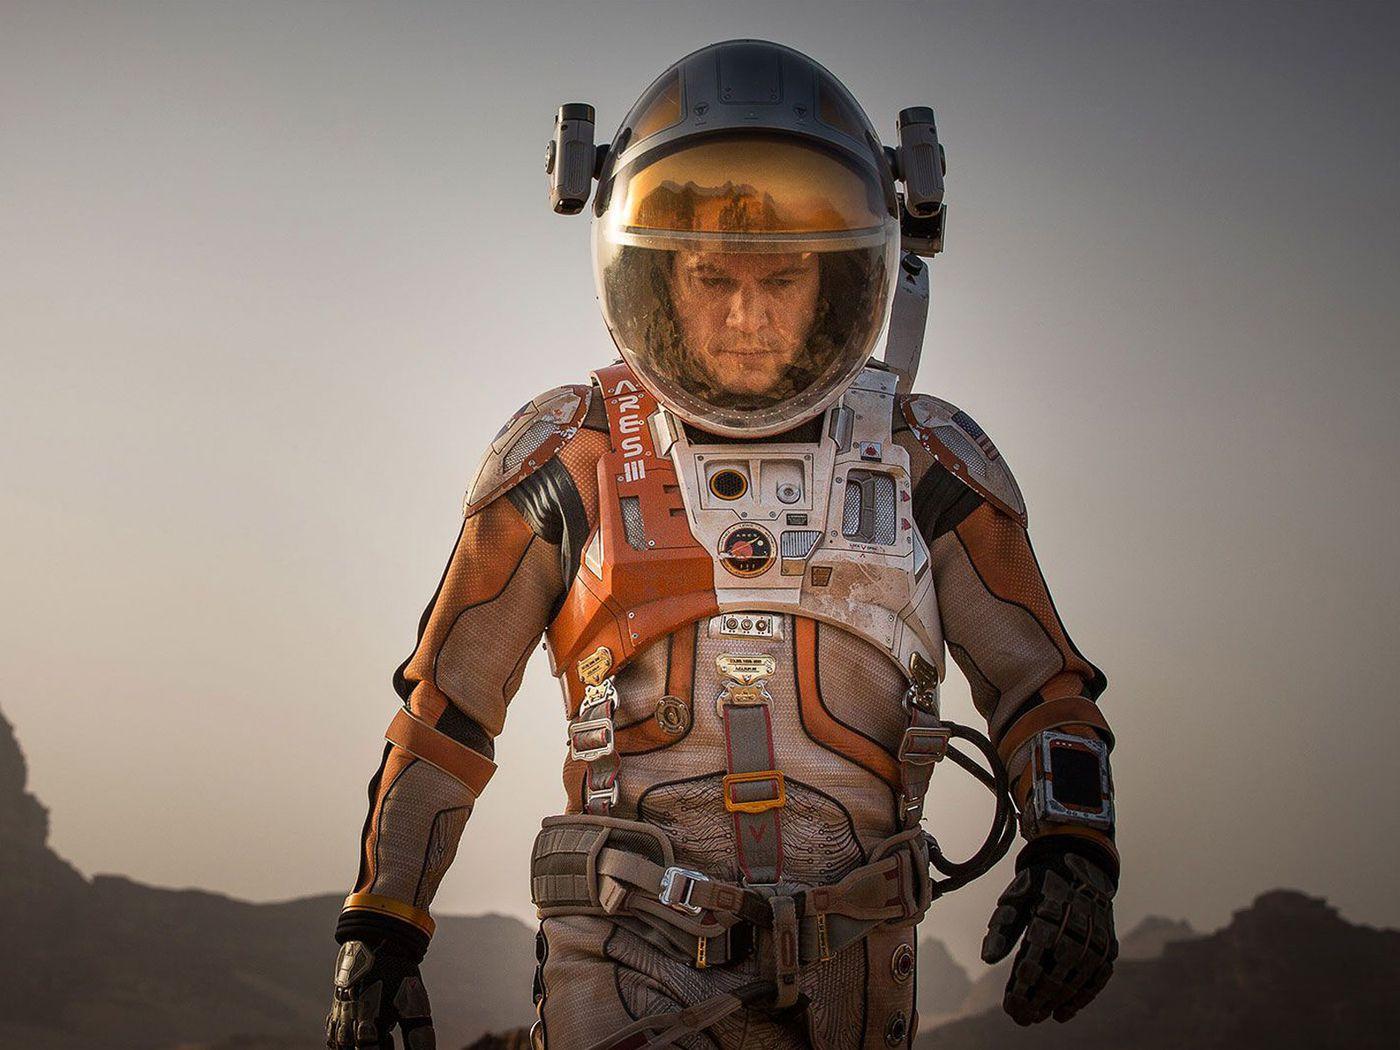 space suits from science fiction, from worst to best